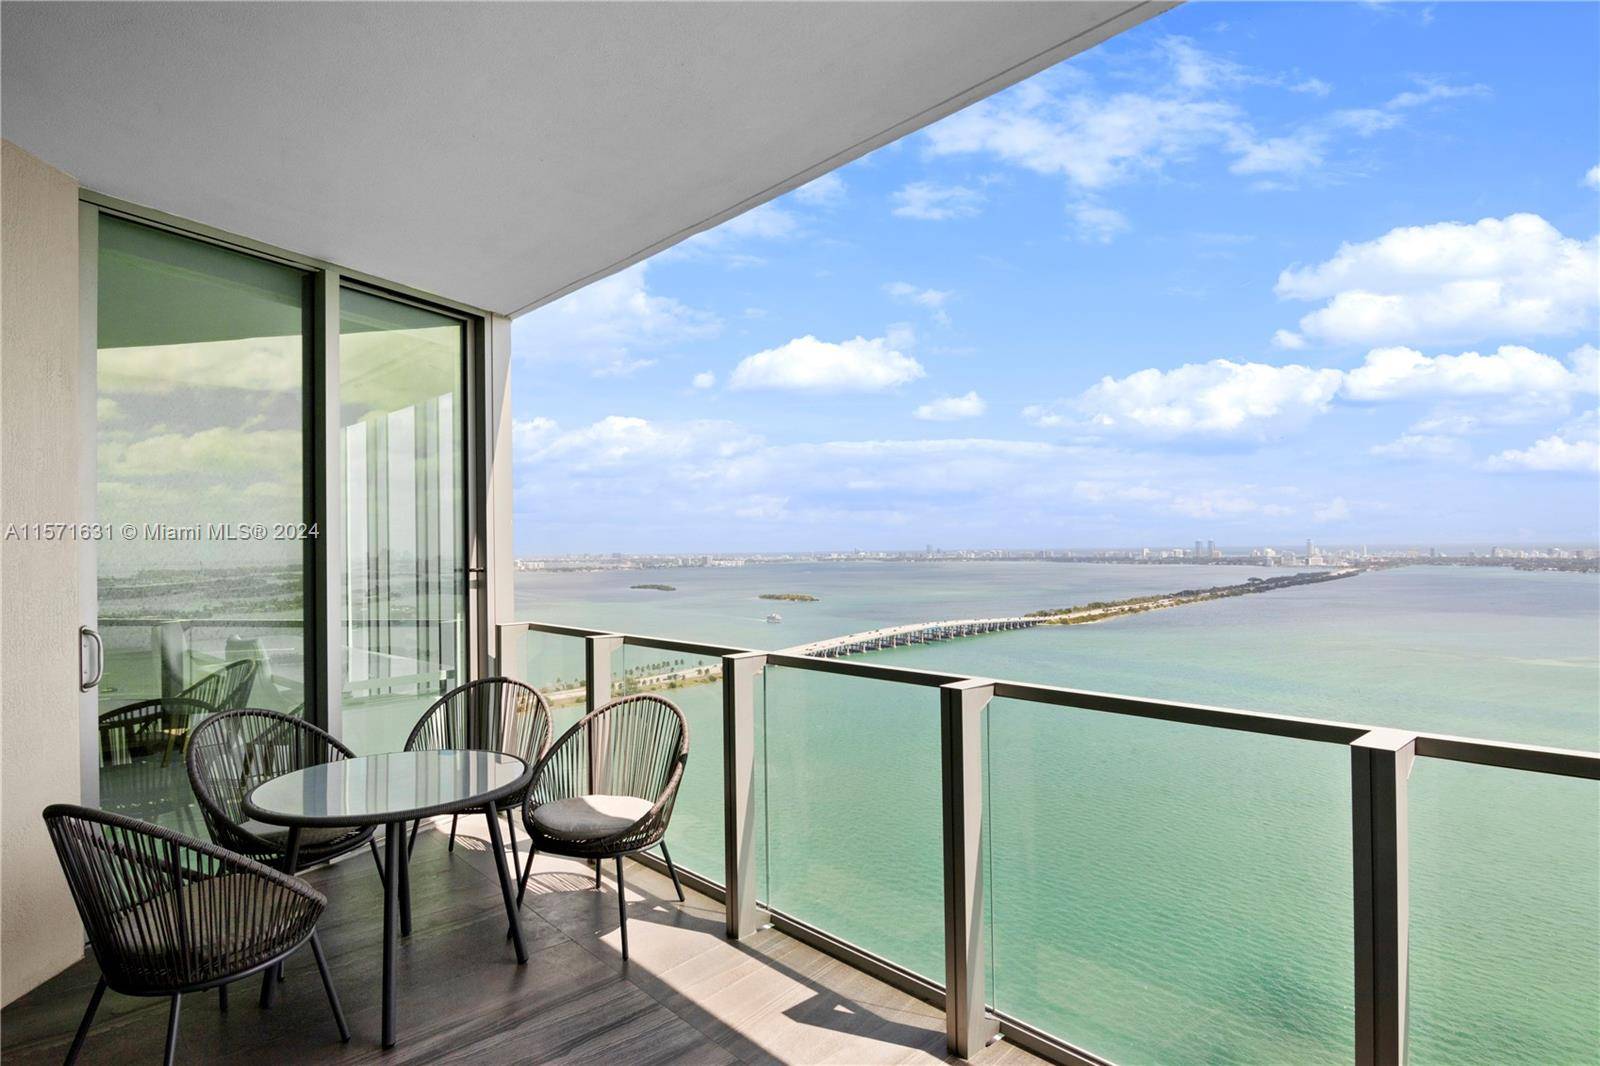 Fully furnished 2 bedroom, 3 bathroom residence with stunning 41st floor, direct bay and ocean views.